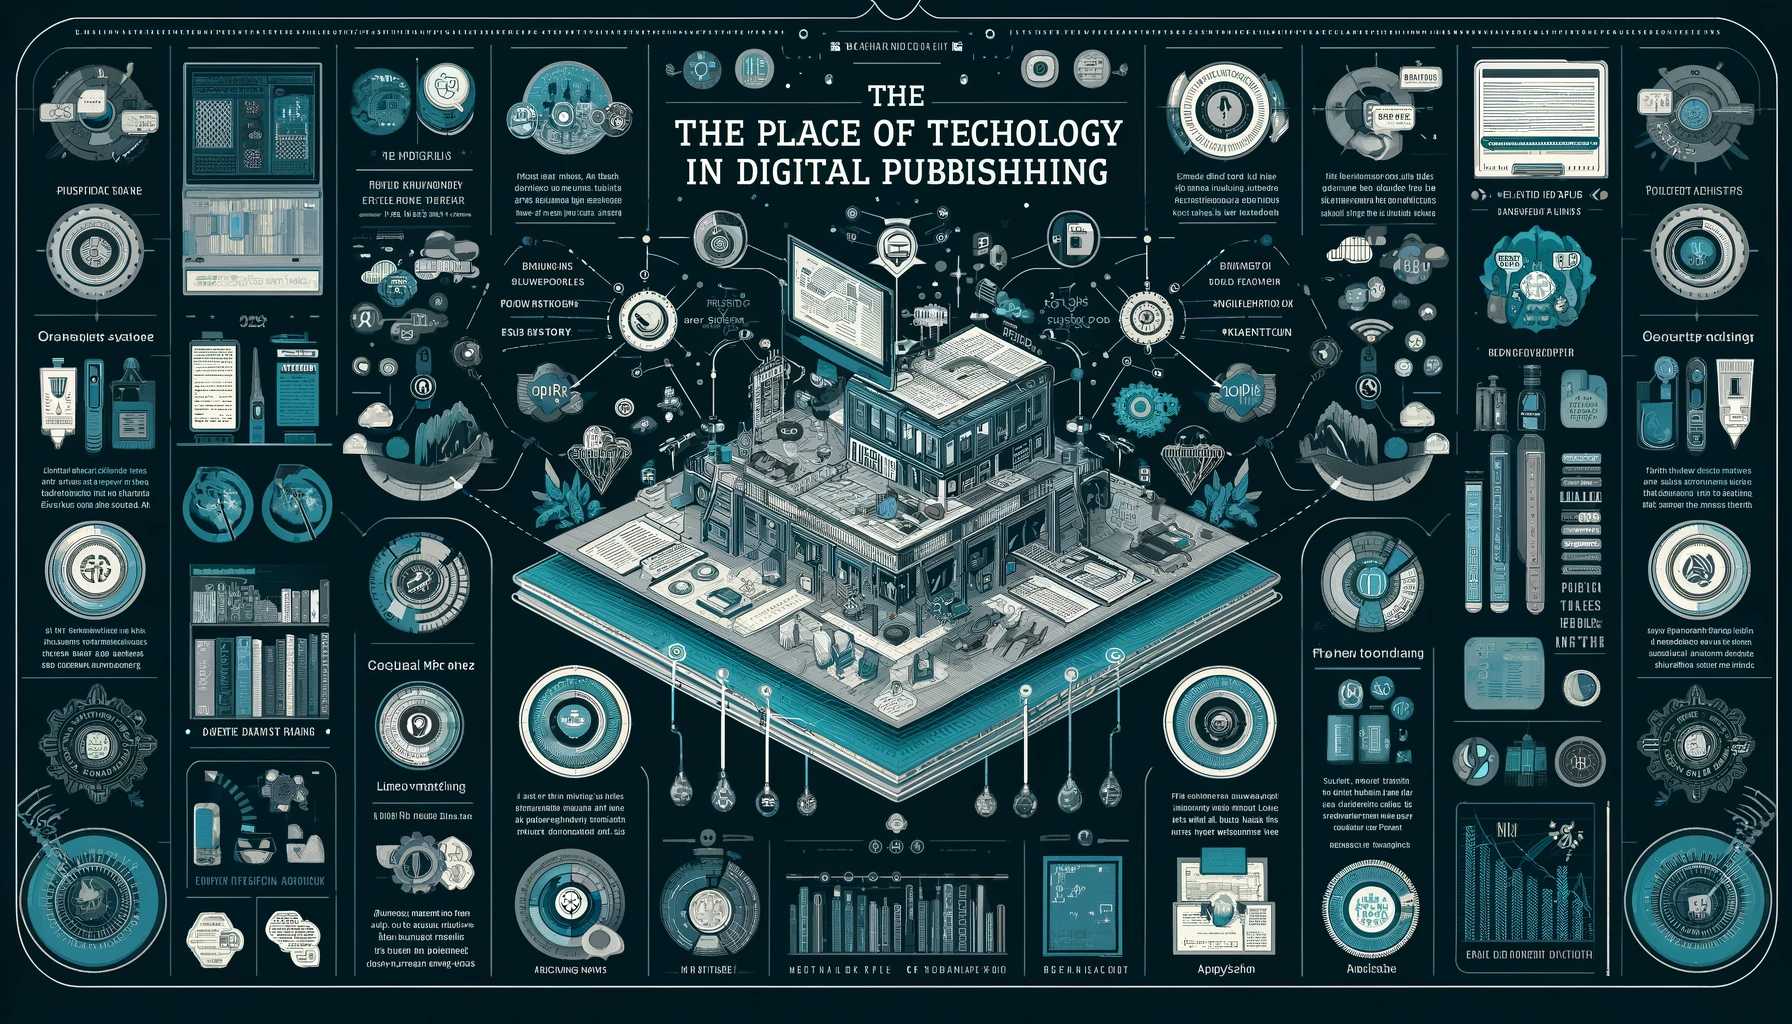 THE PLACE OF TECHNOLOGY'S IN DIGITAL PUBLISHING